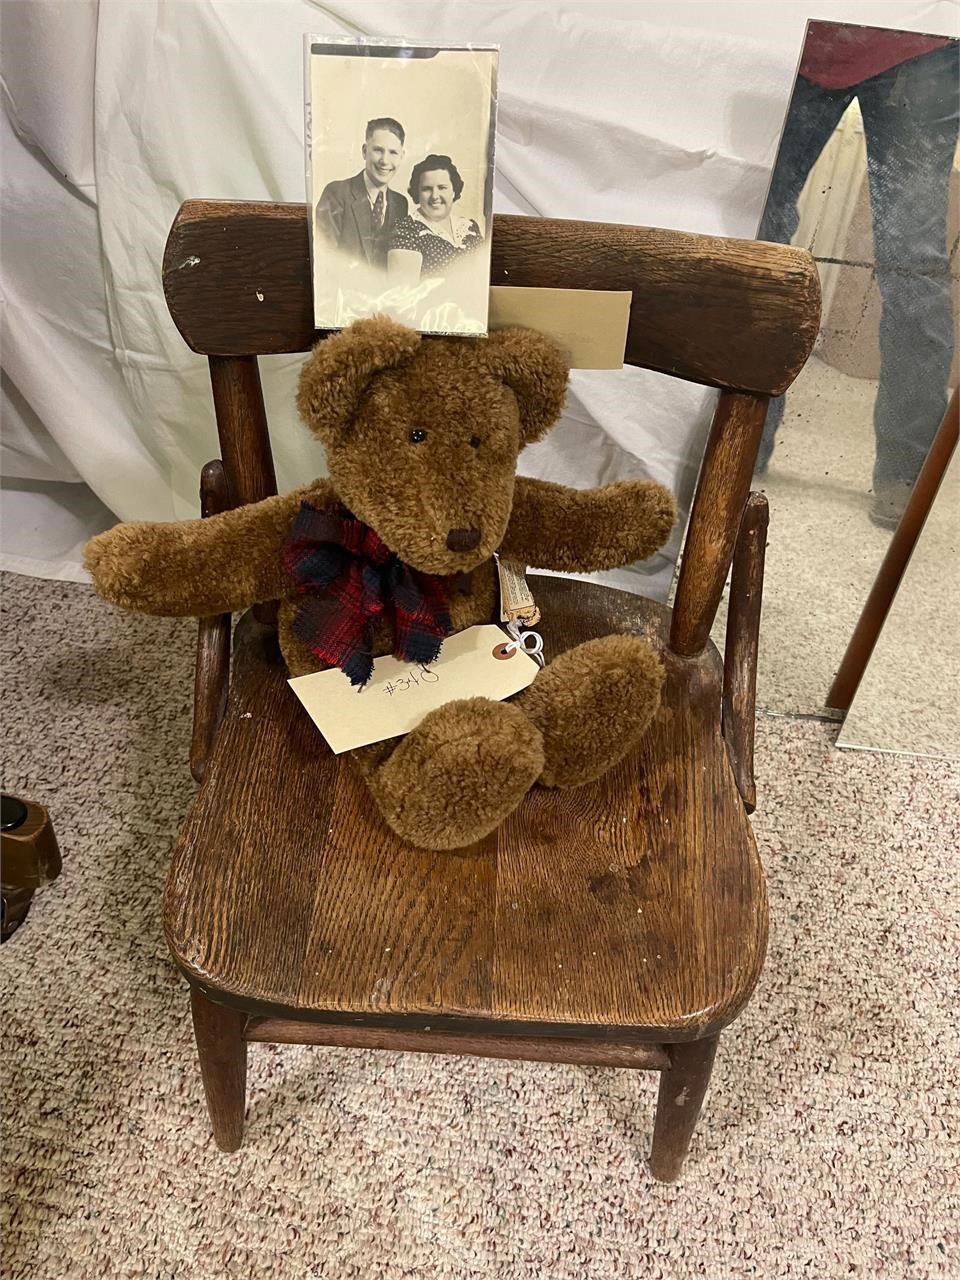 Antique Chair with Bear and family pictures